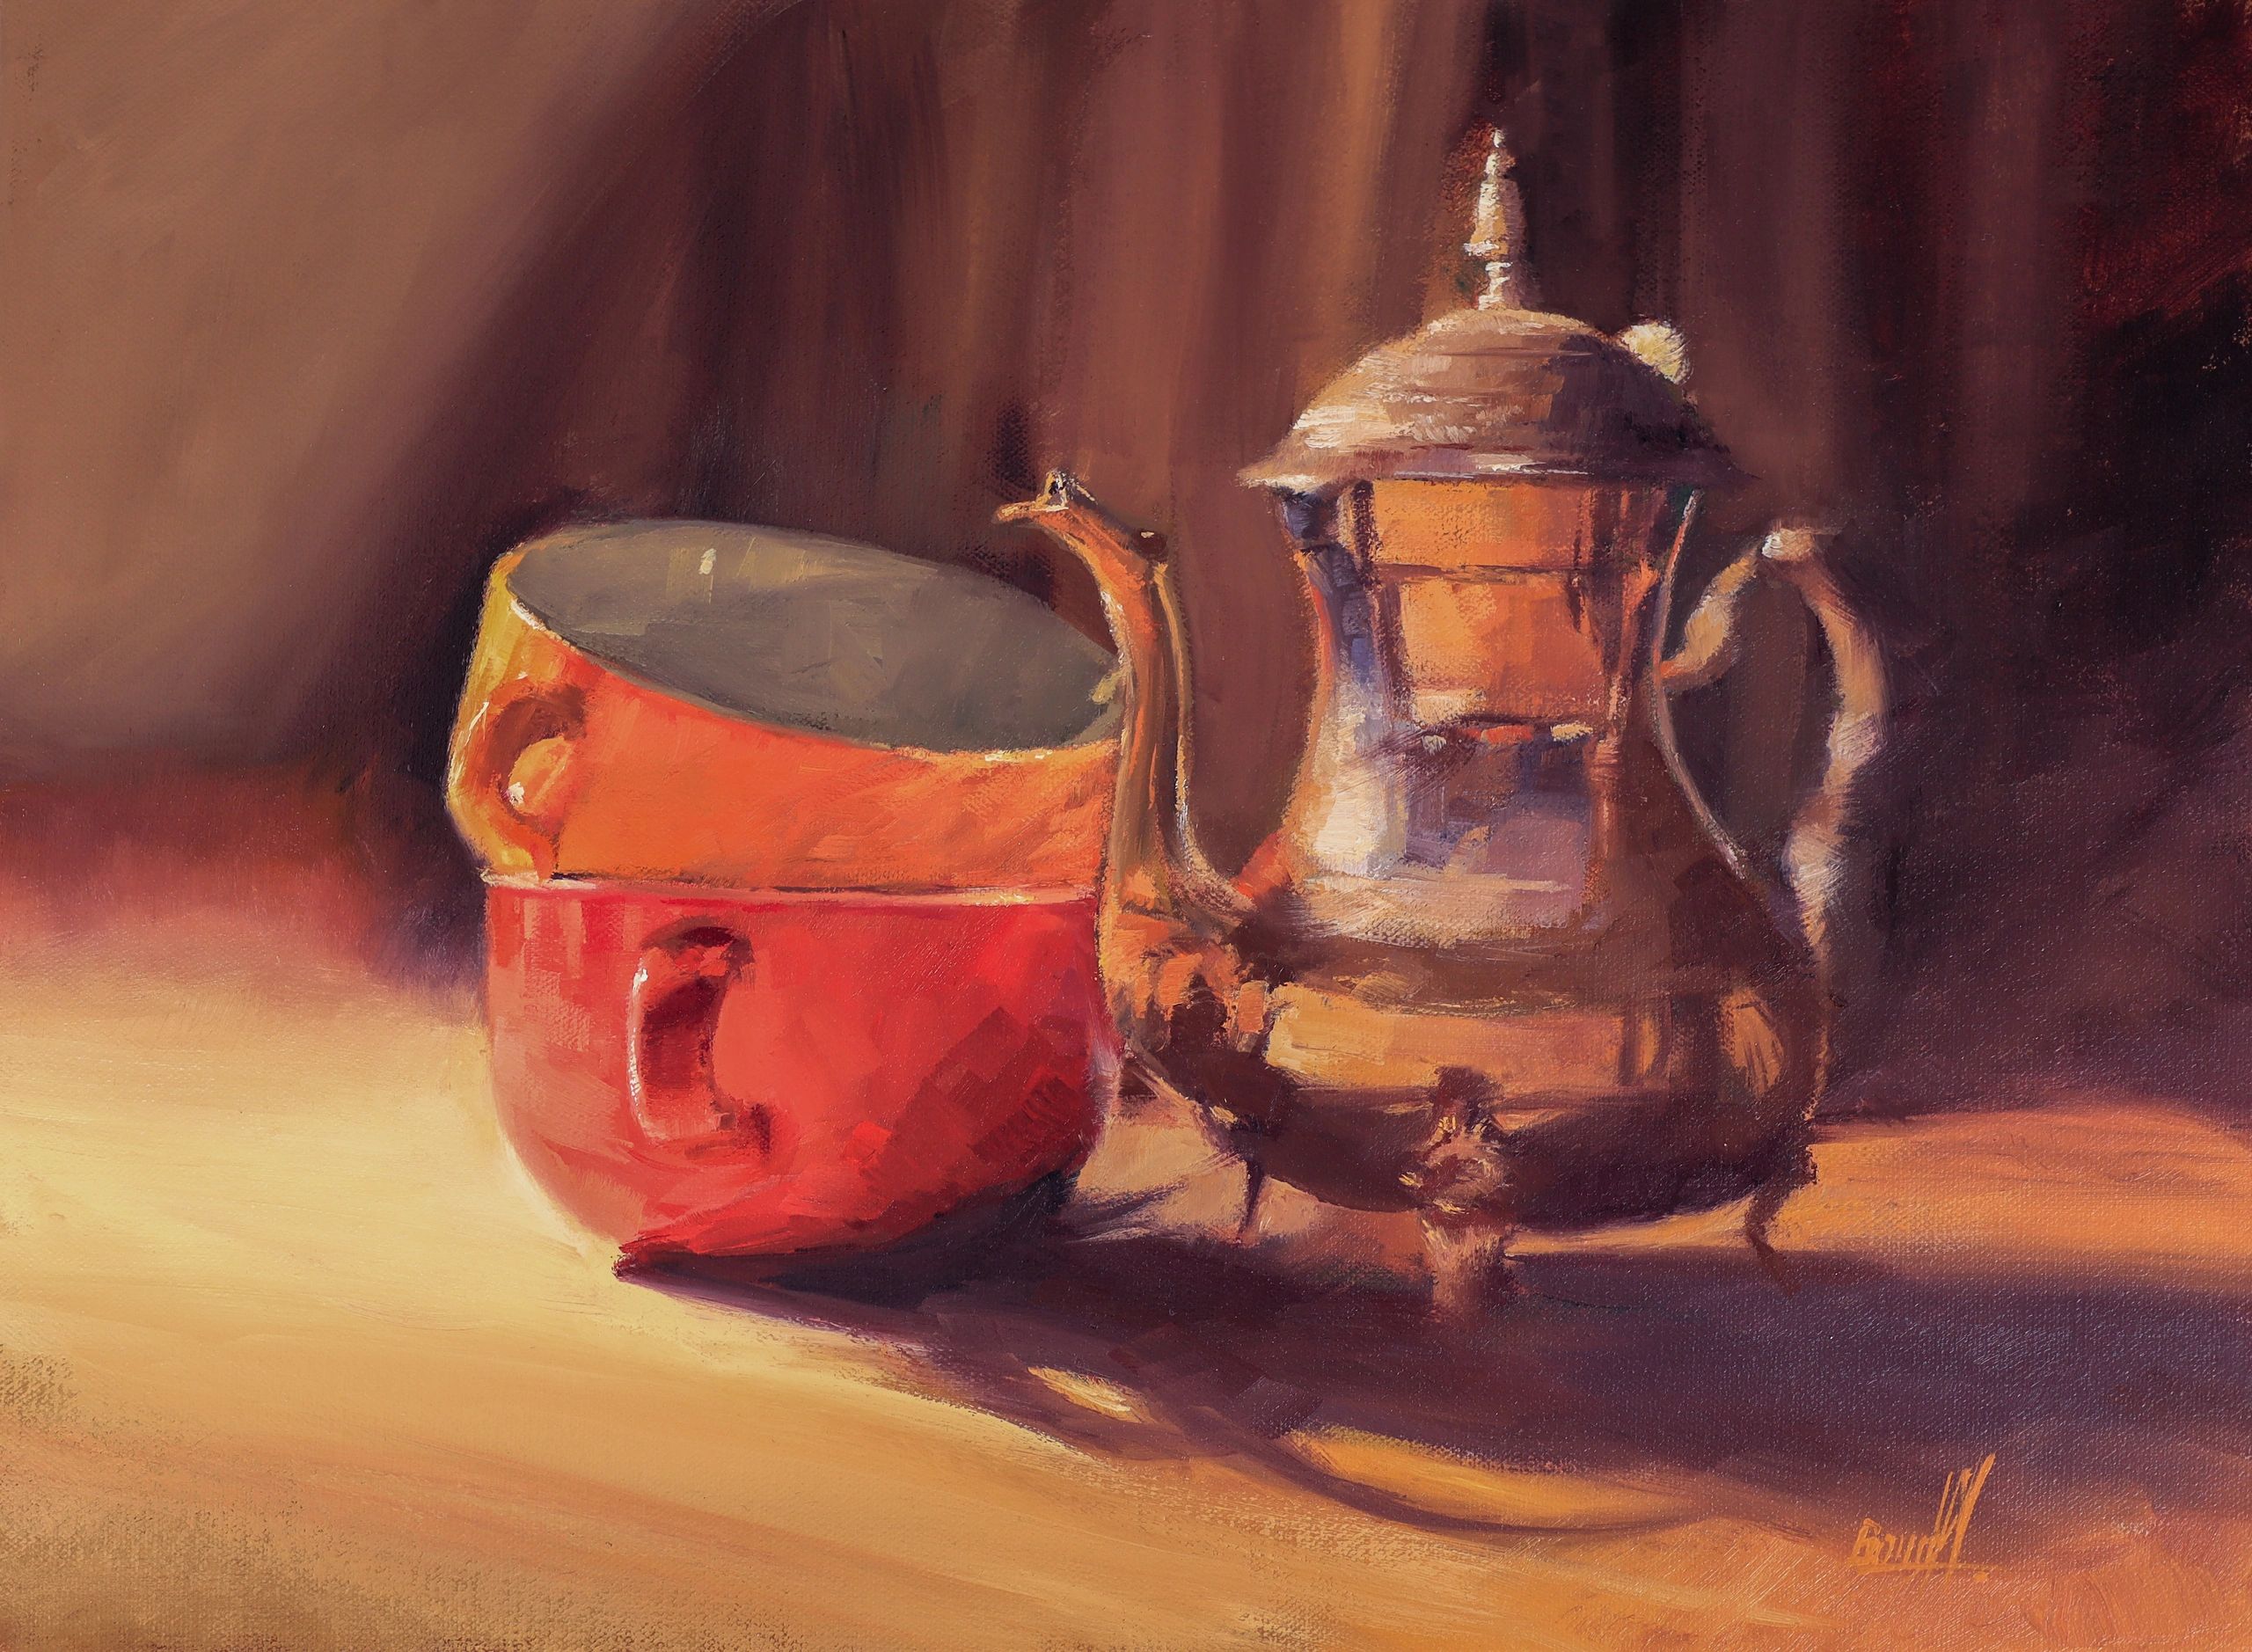 Oil on linen
Coffee jug and cups
